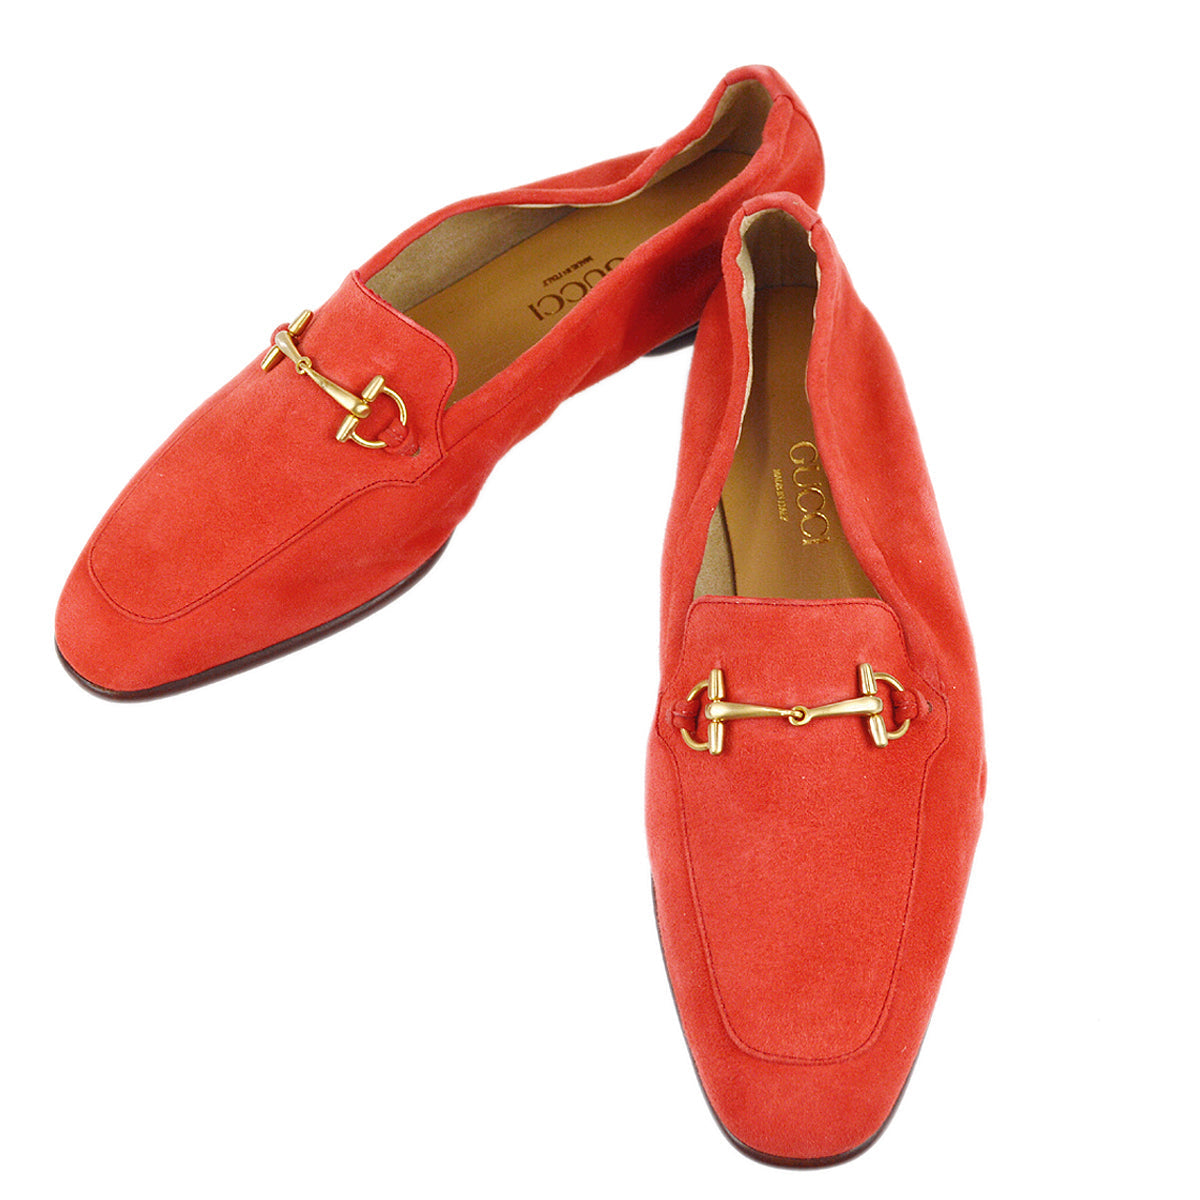 Gucci * Suede Horsebit Loafers Shoes 